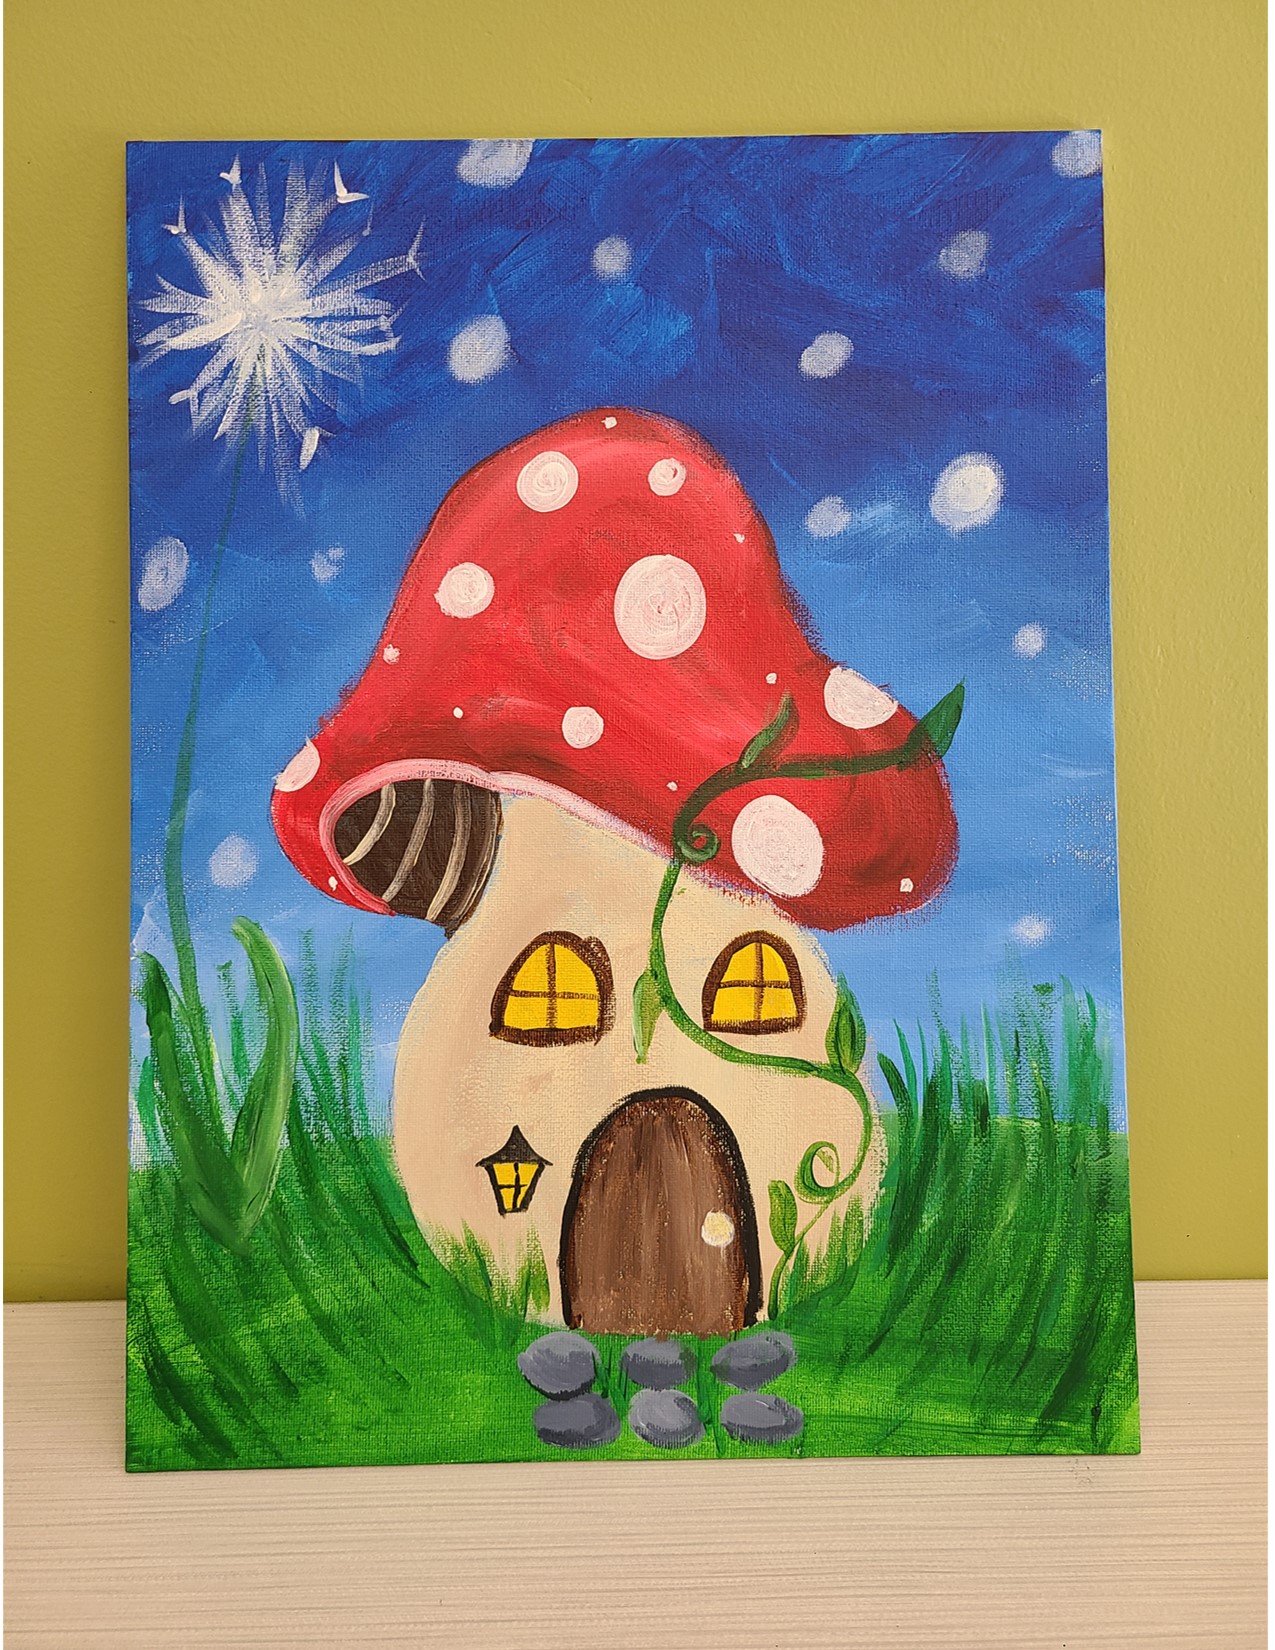 Painting of a mushroom house with a red top against a blue sky with green grass